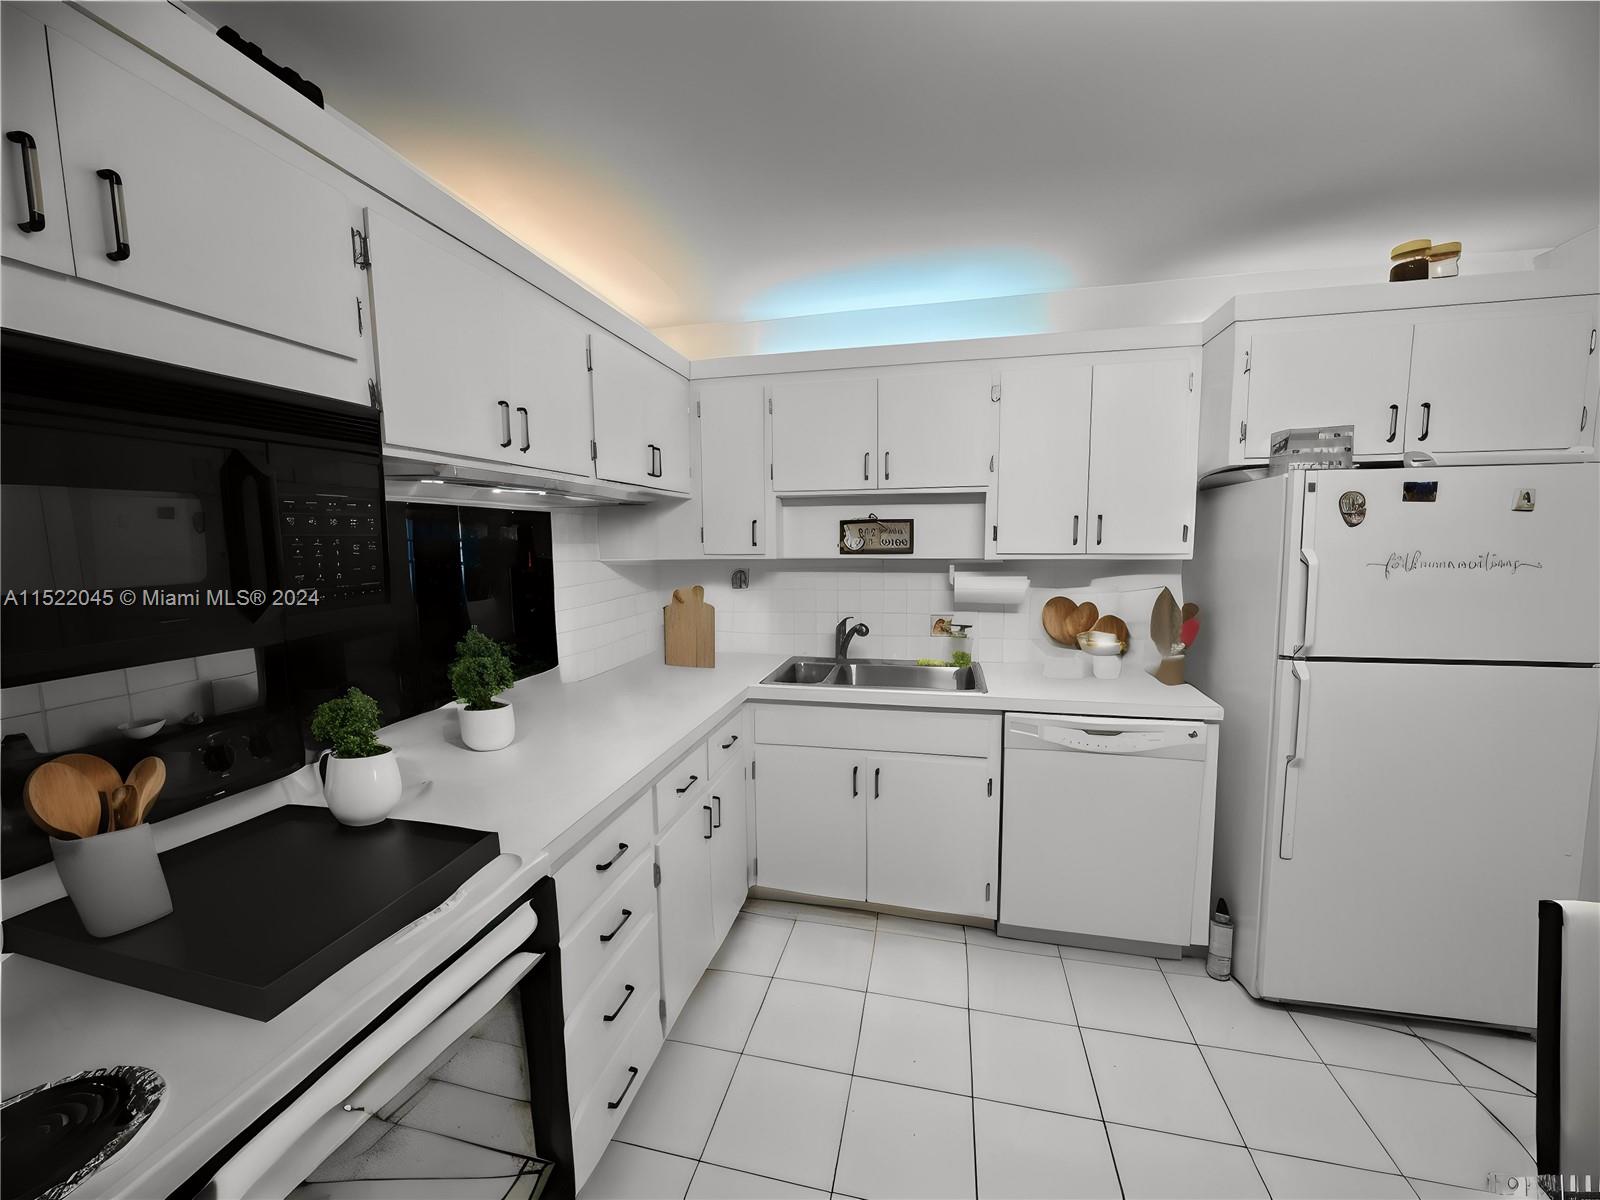 a kitchen with cabinets and appliances